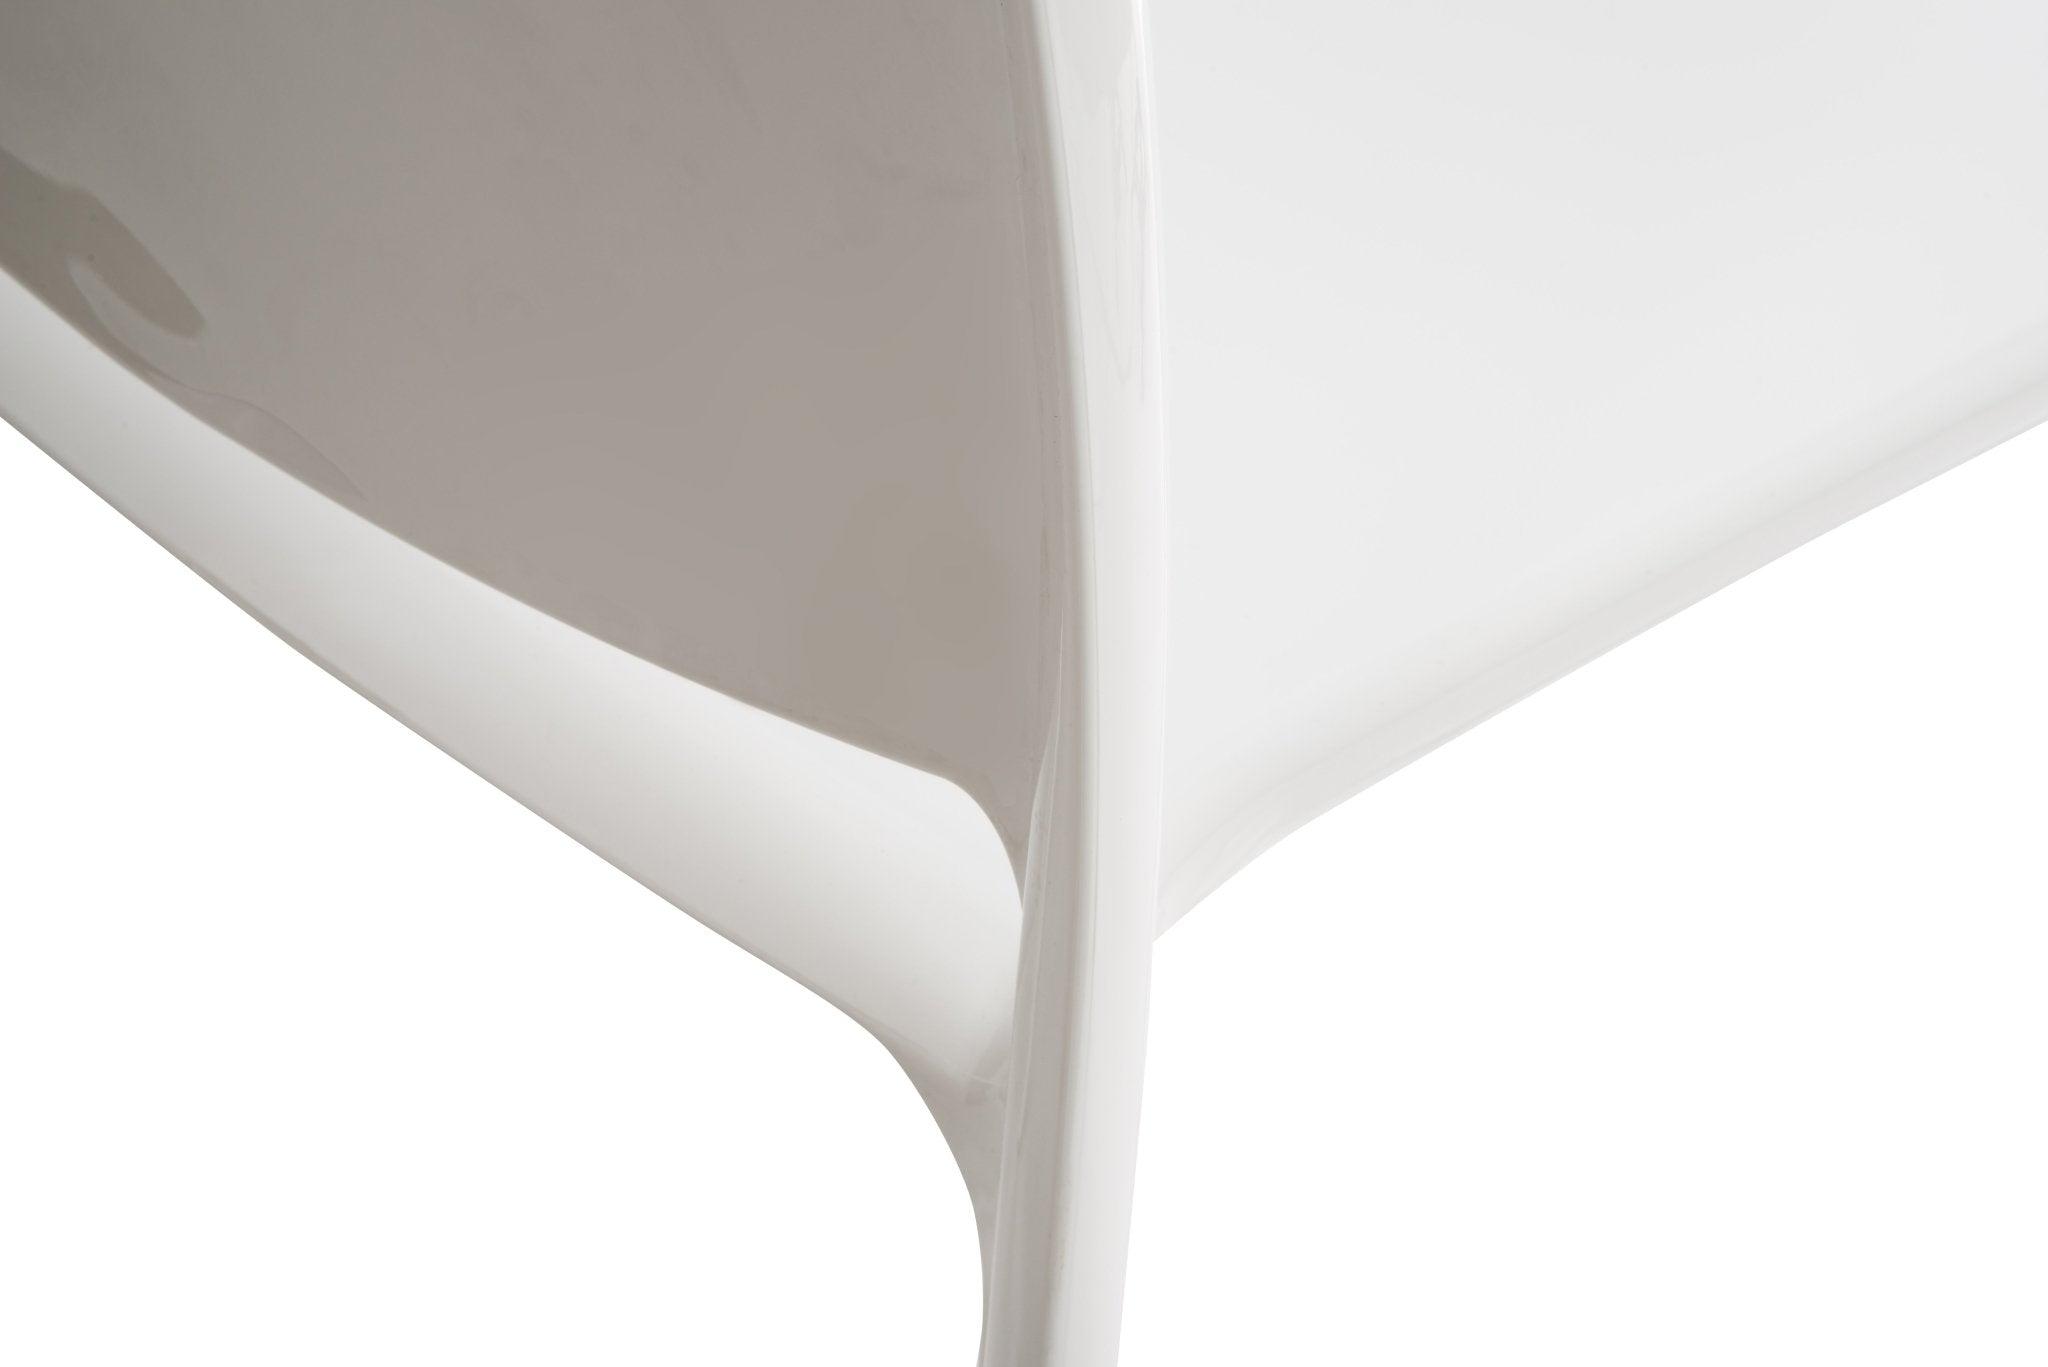 Clarity dining room chair (white) pack of 4 - crimblefest furniture - image 4